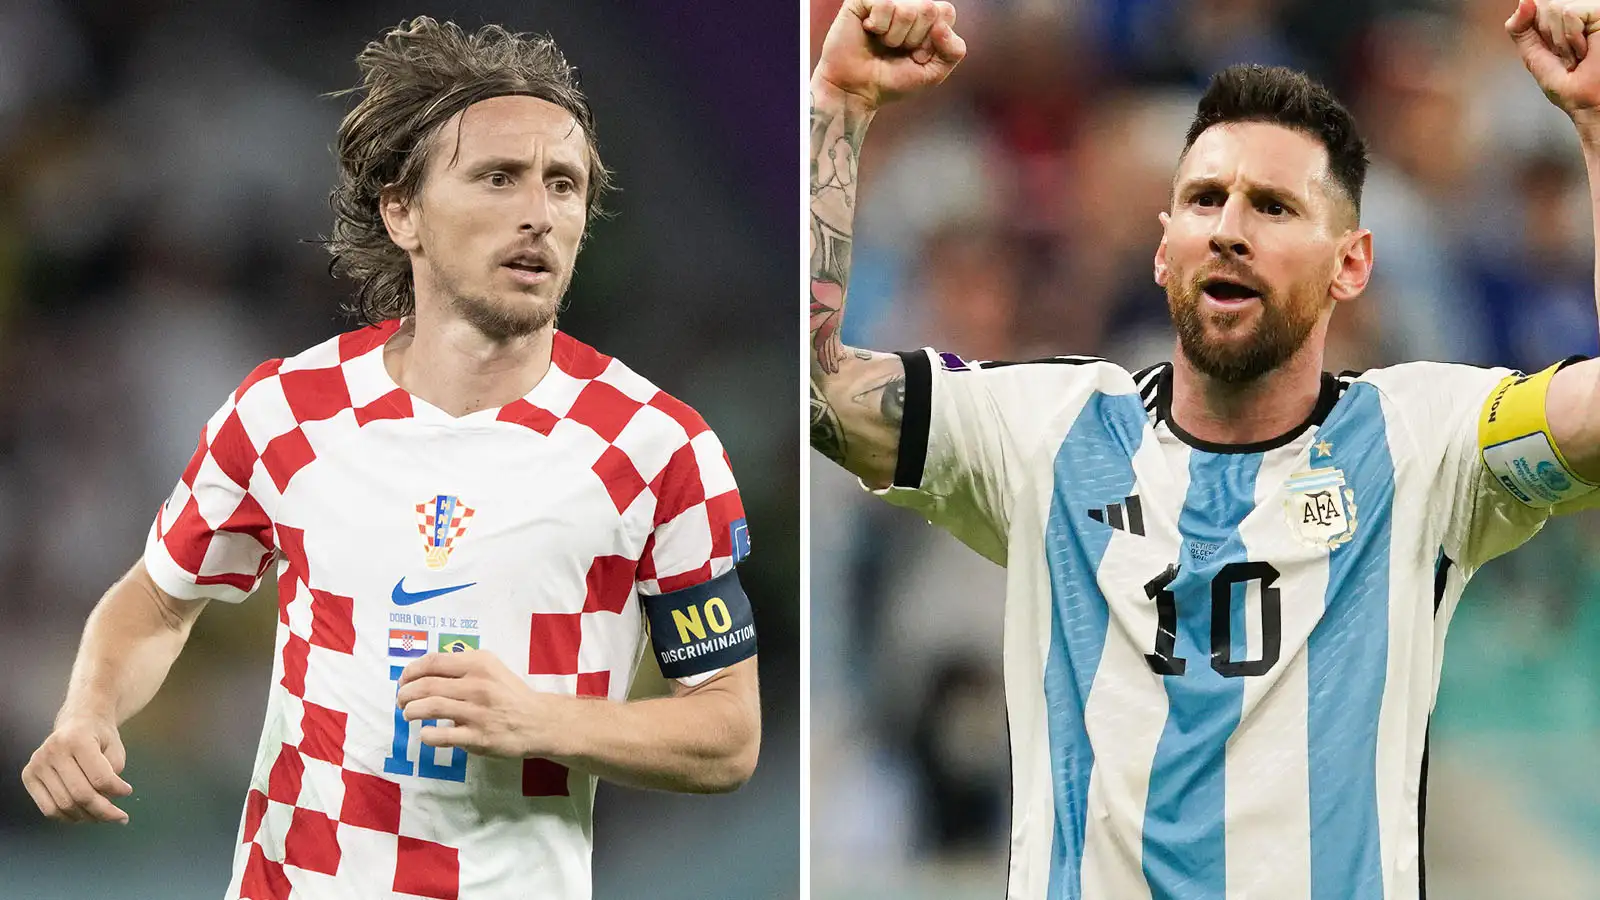 Comparing Lionel Messi and Luka Modric’s World Cup stats